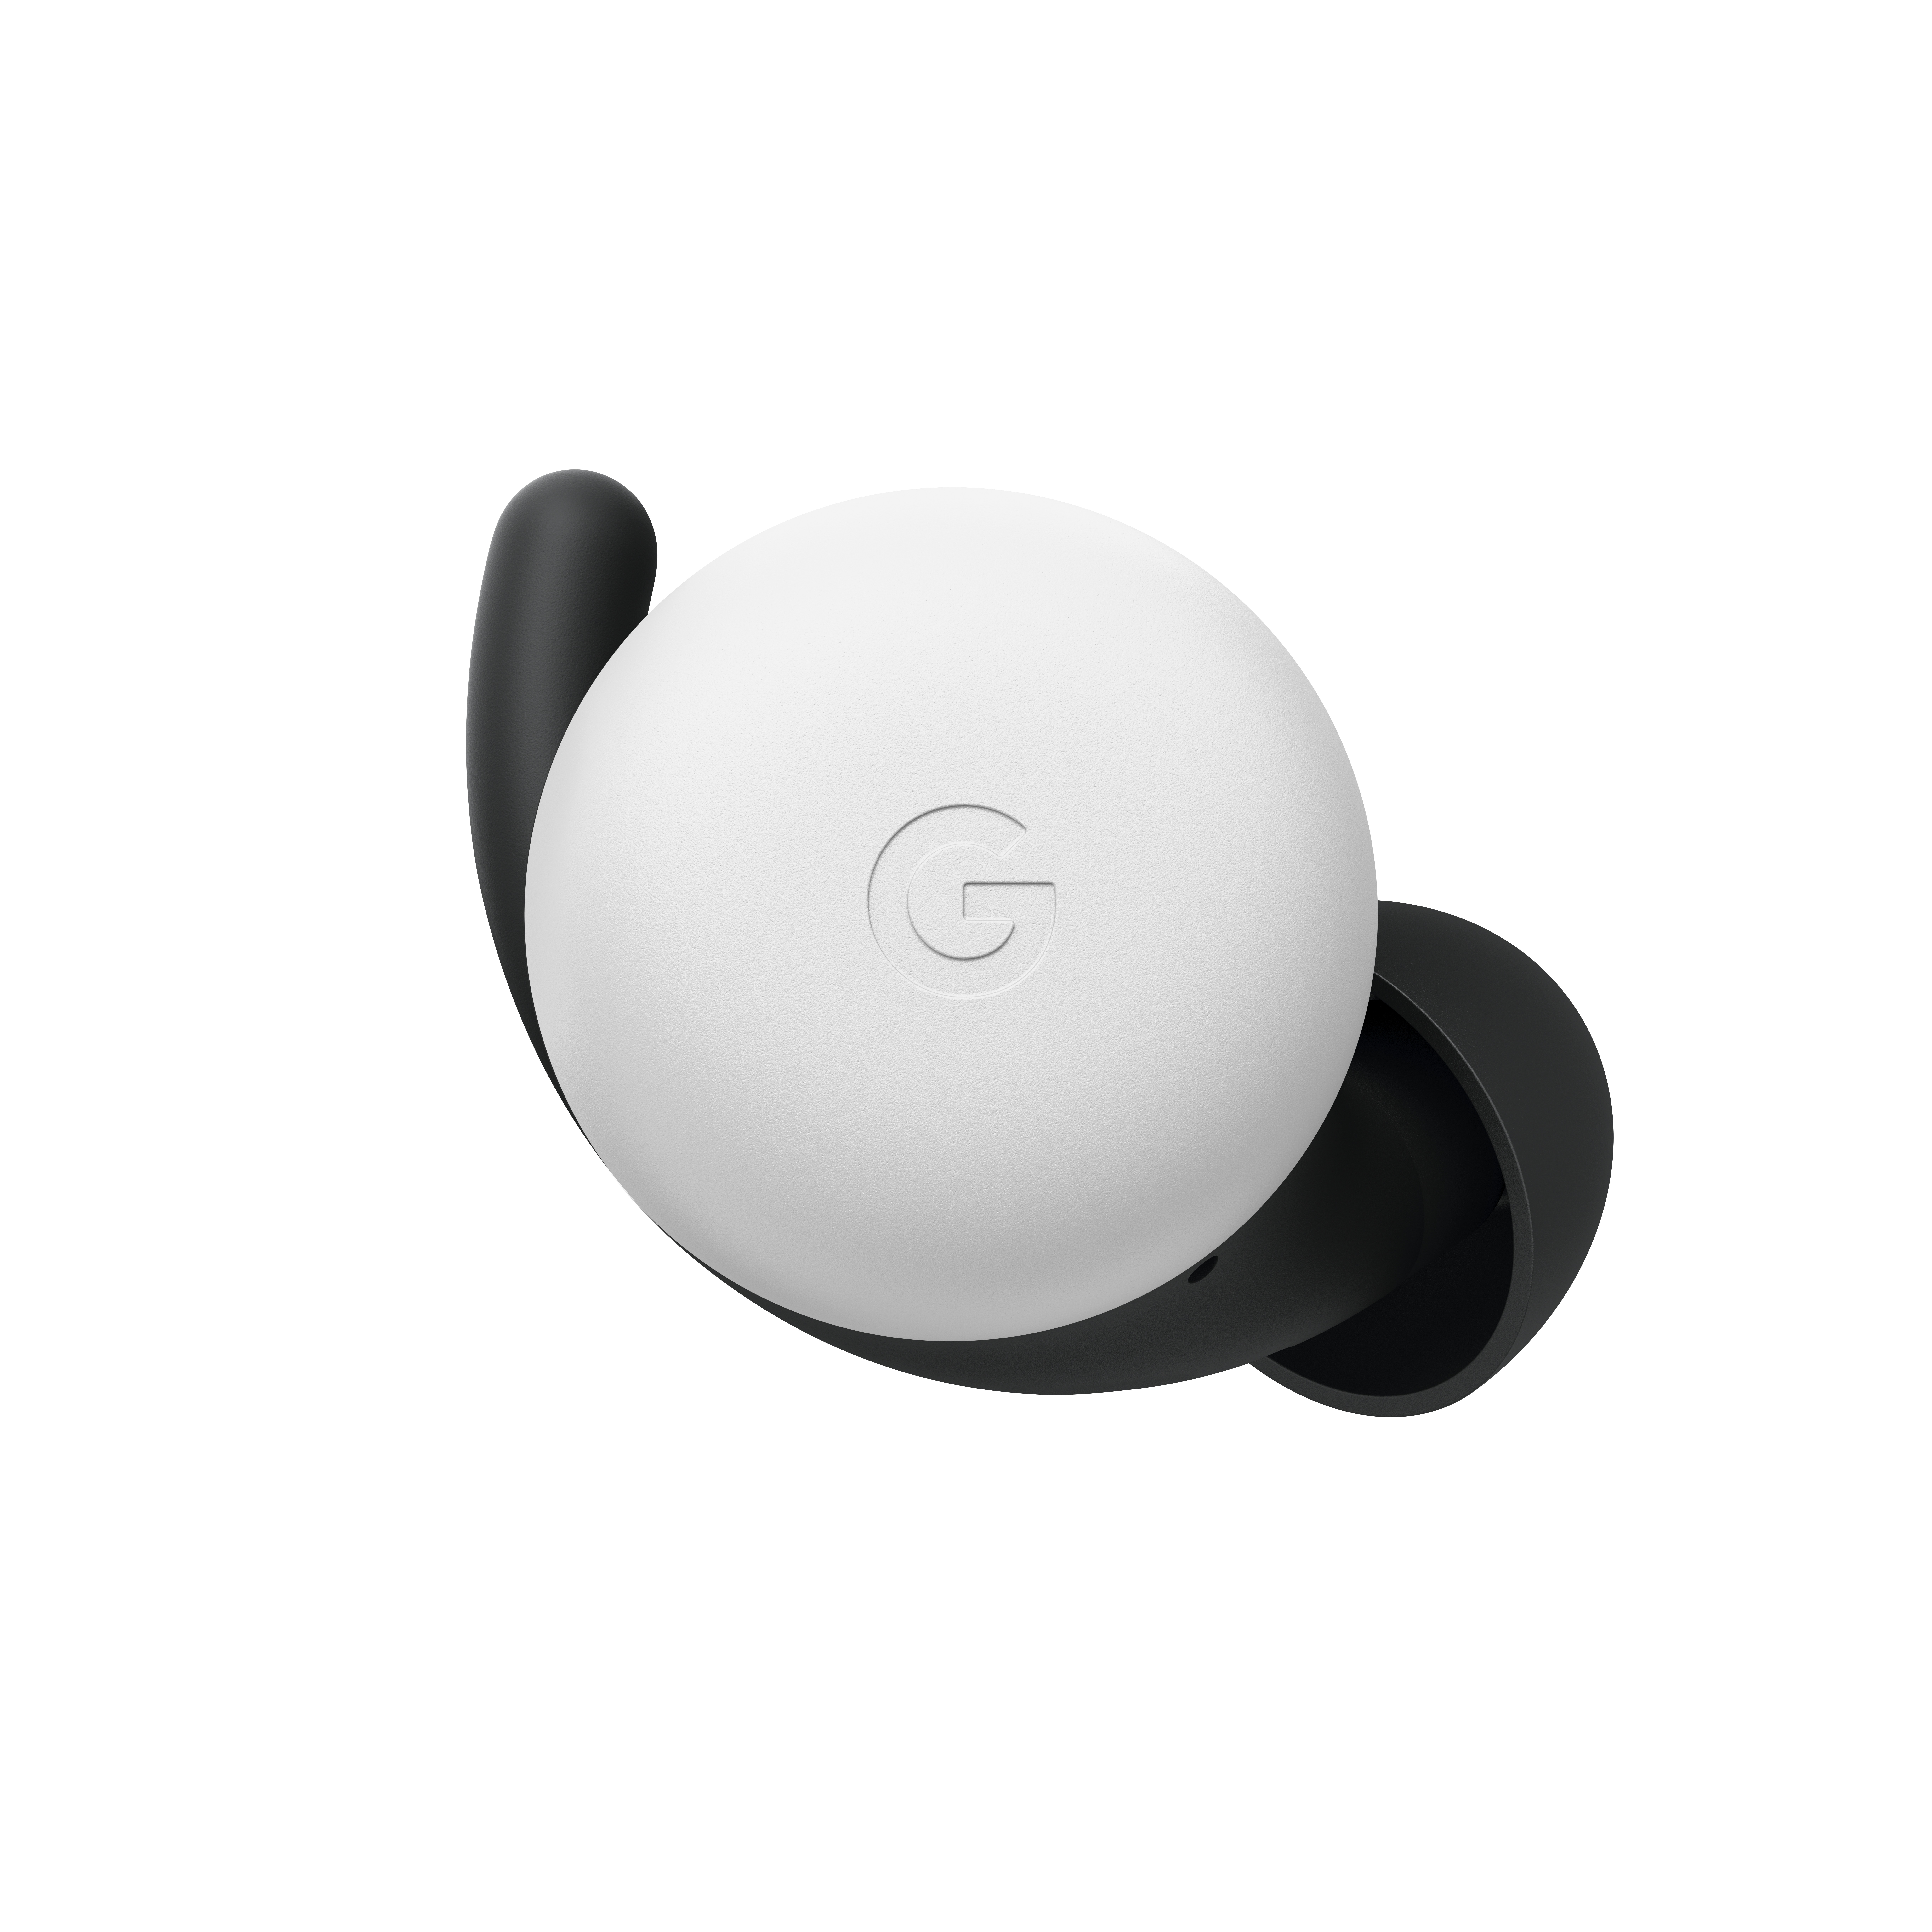 Google Pixel Buds, Clearly White - image 5 of 8